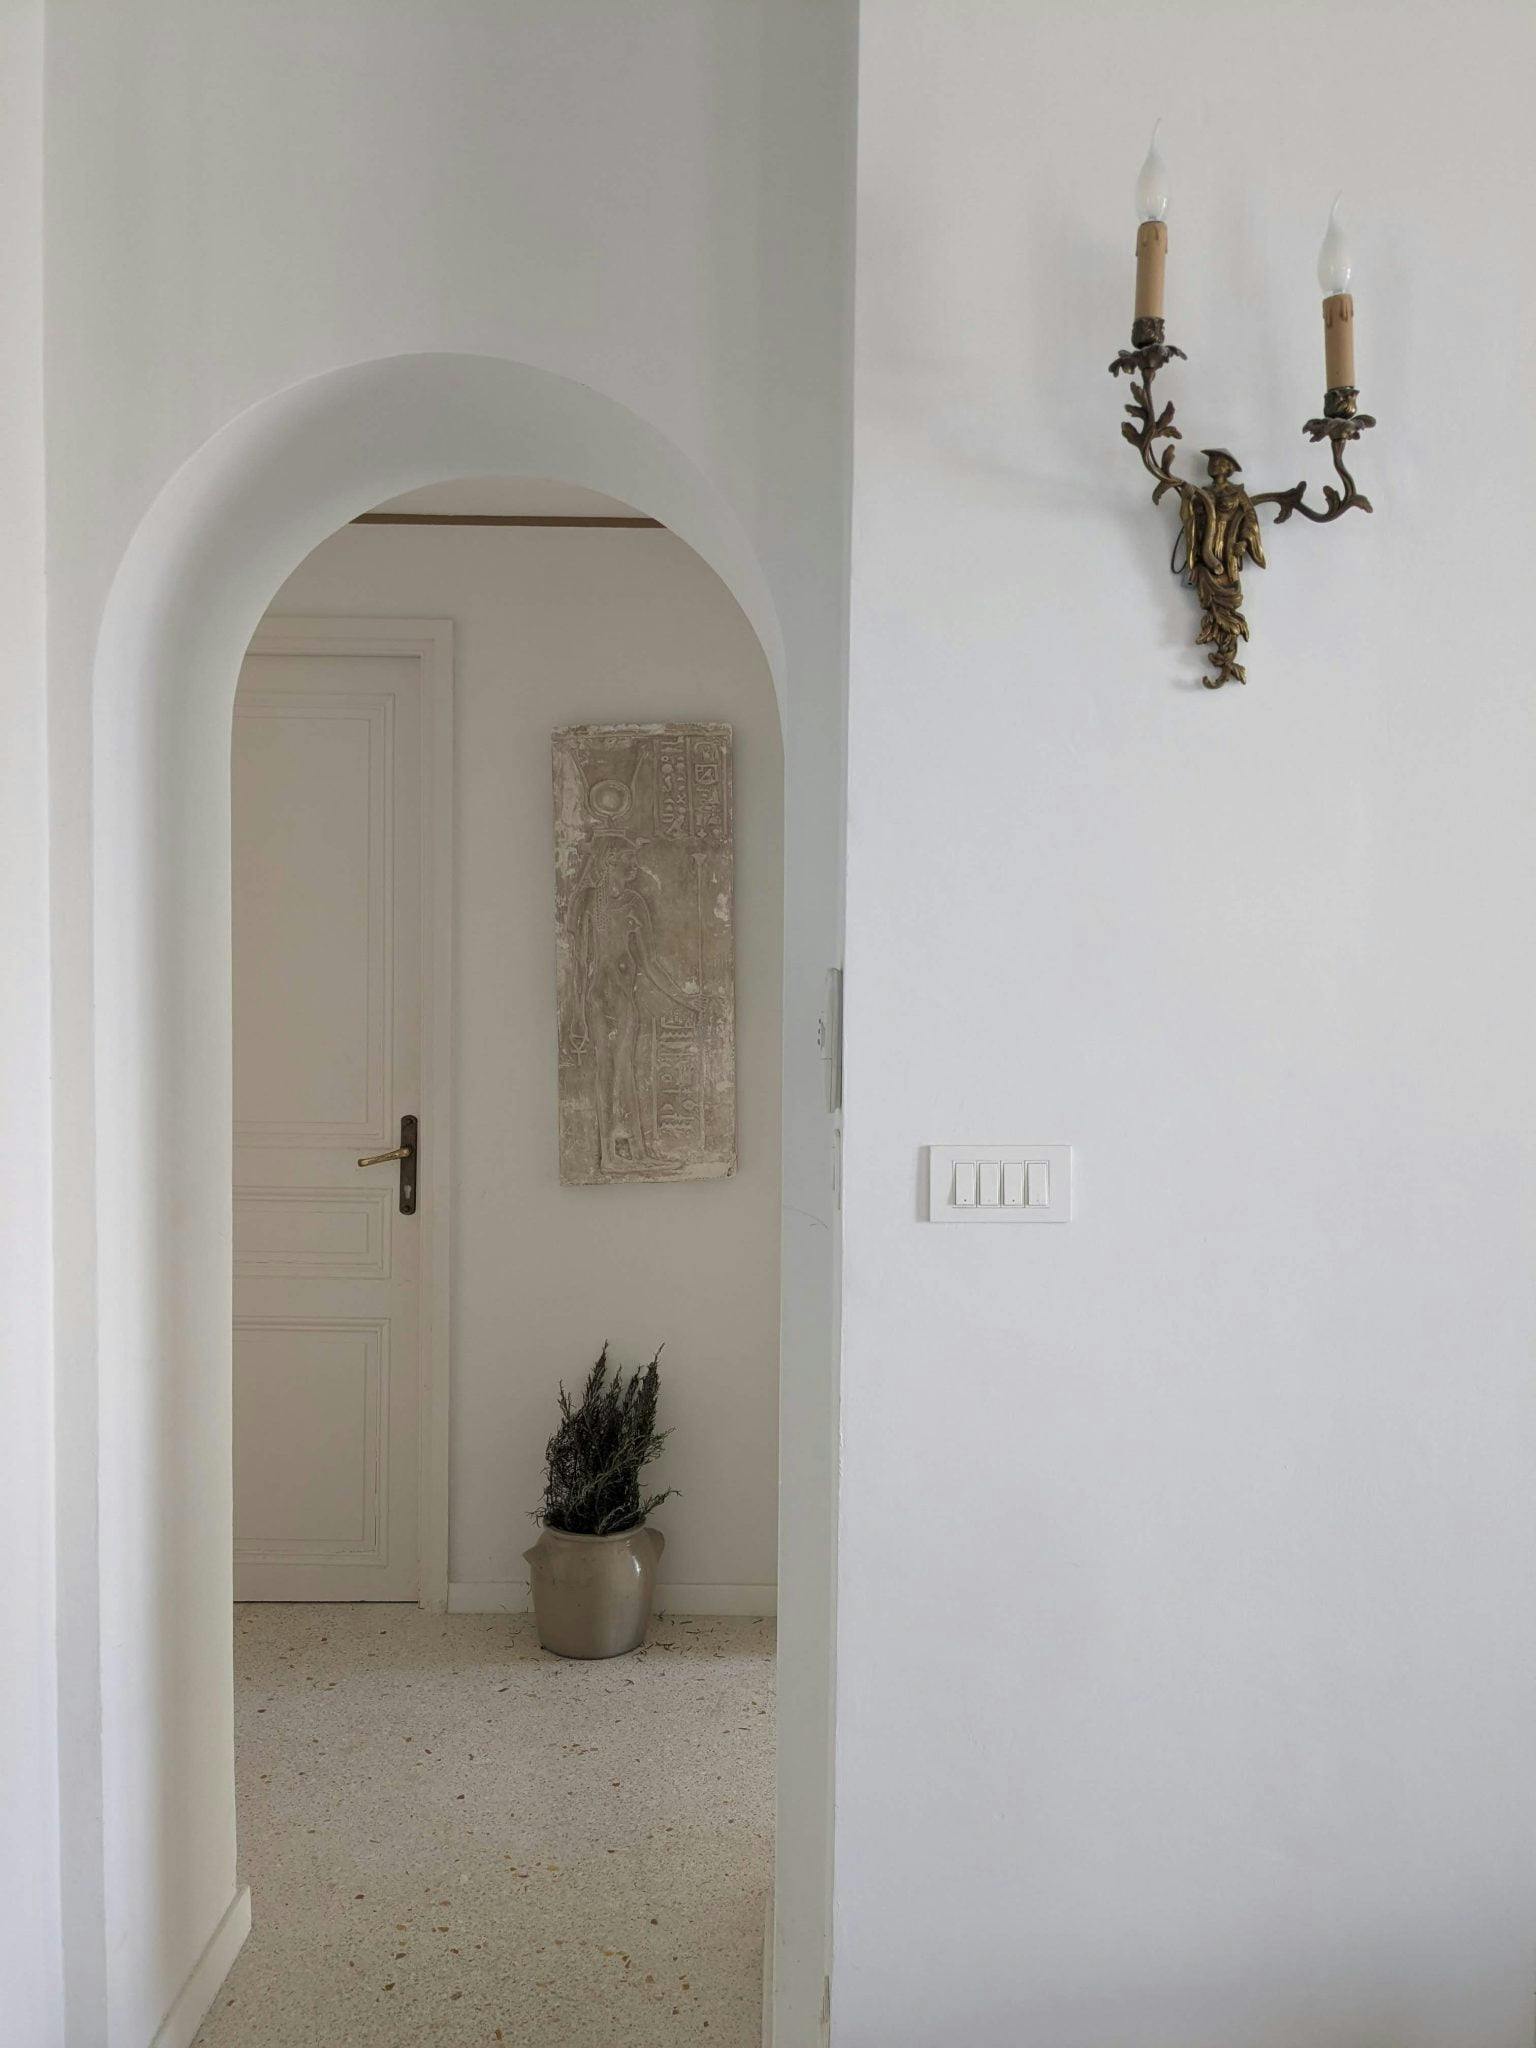 enfilade view of the hallway and alcove, antique wall lighting and terrazzo floor